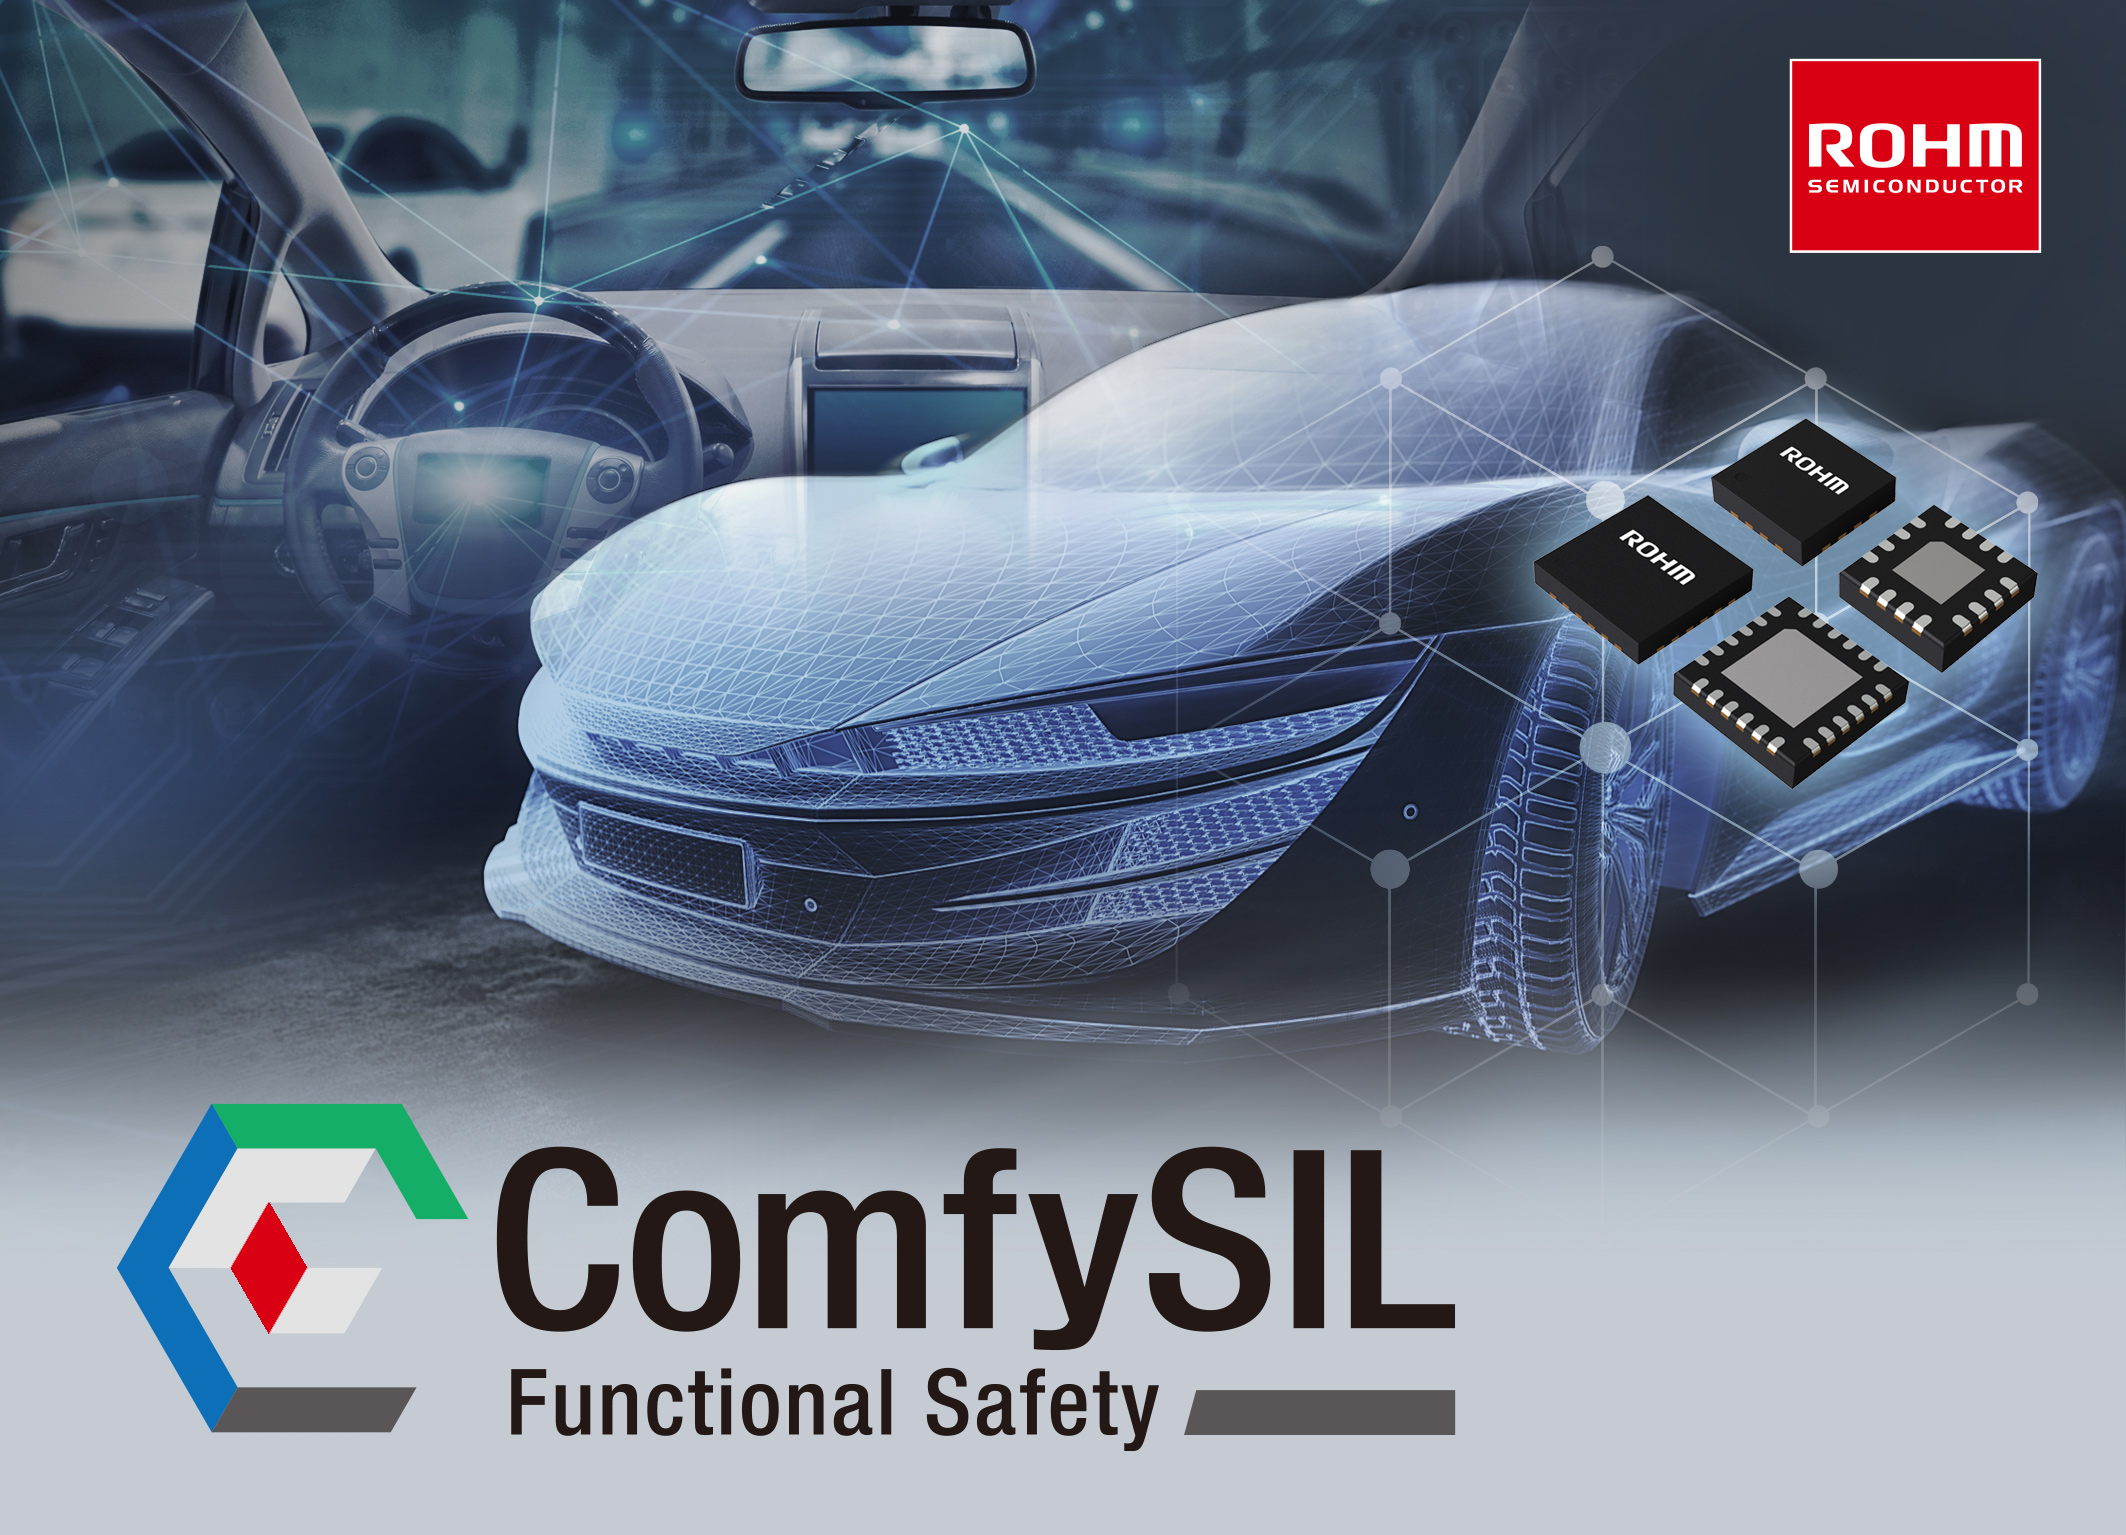 ROHM has consolidated more than 1,000 products under the ComfySIL™ brand to support functional safety in automotive systems.